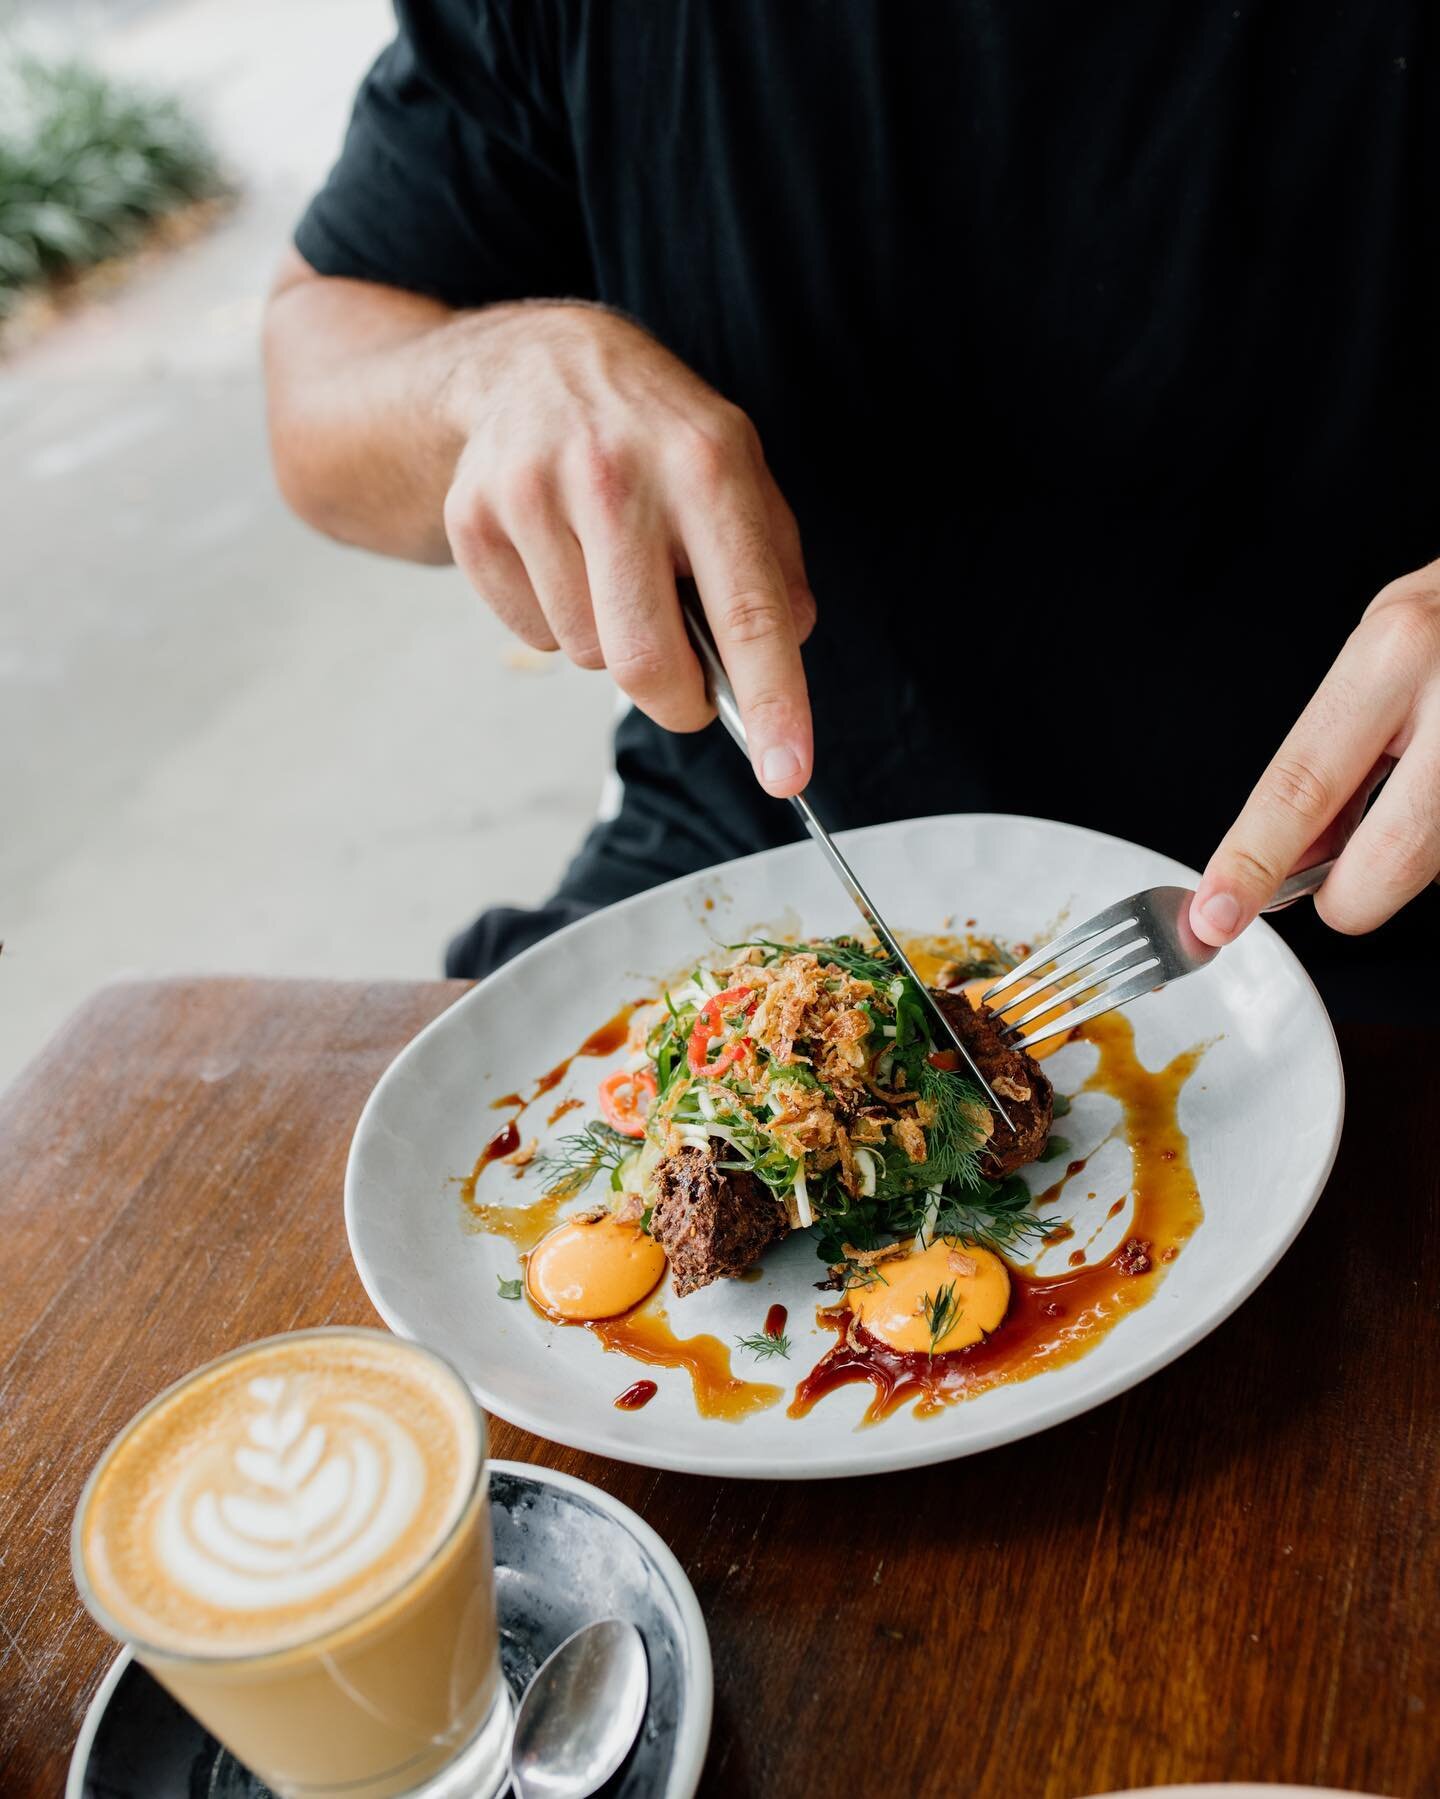 &ldquo;Join us for a delicious lunch at Blackboard Varsity! Come feast your eyes and your taste buds on our mouth-watering dishes. Don't forget to tag us in your photos @ &ldquo;

#drinkcoffee #coffeegram #coffeeshop #coffeeporn #coffeevibes #cafevib